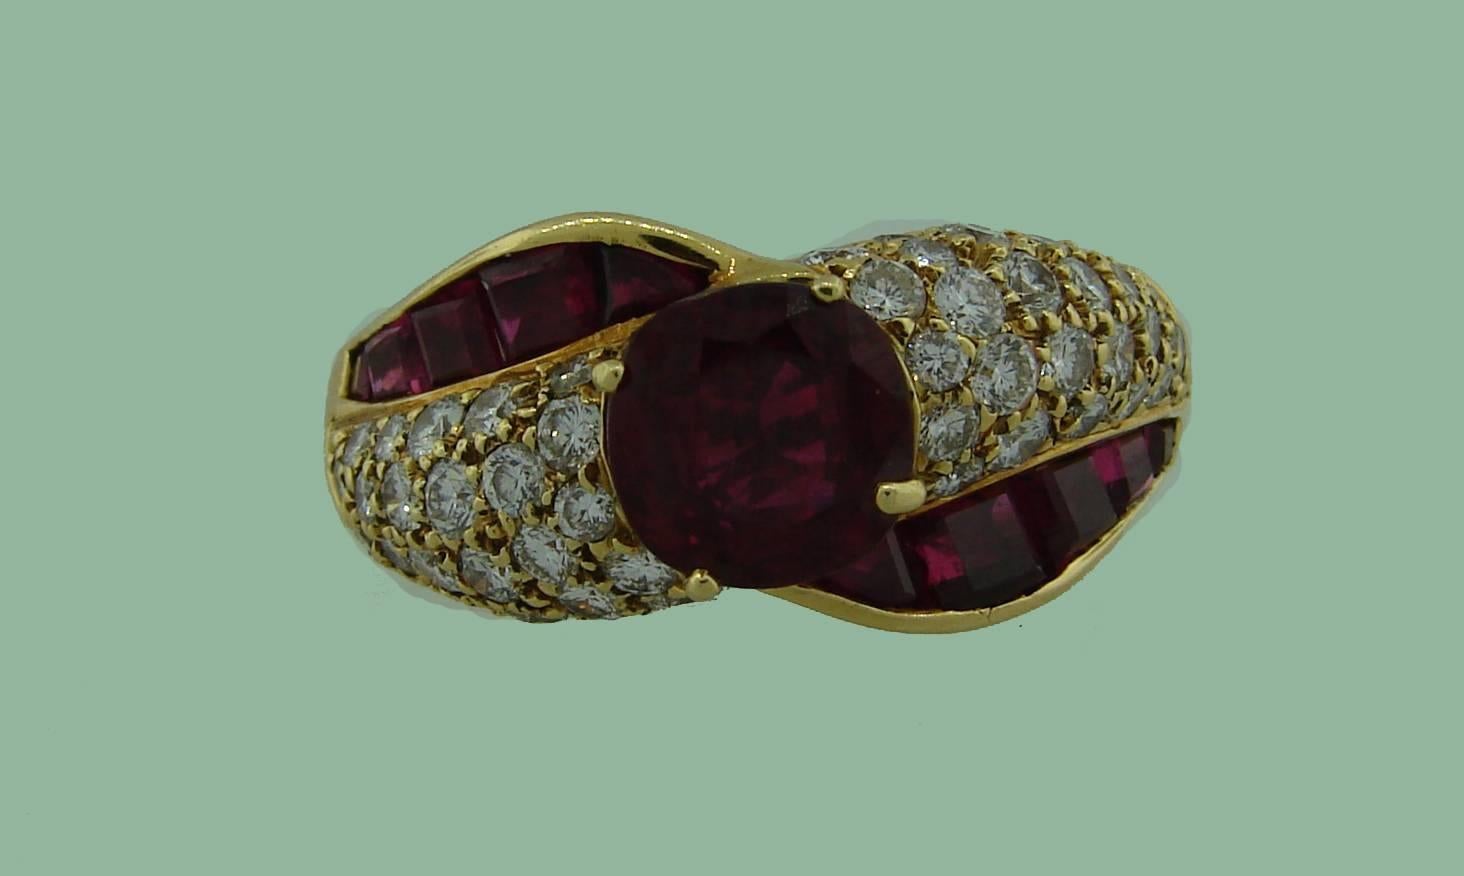 Chic and timeless cocktail ring created by GRAFF in the 1980's. Features an approximately 2.06 carat round faceted ruby accented with rubies and diamonds set in 18k yellow gold. The center ruby is accompanied with an American Gemological